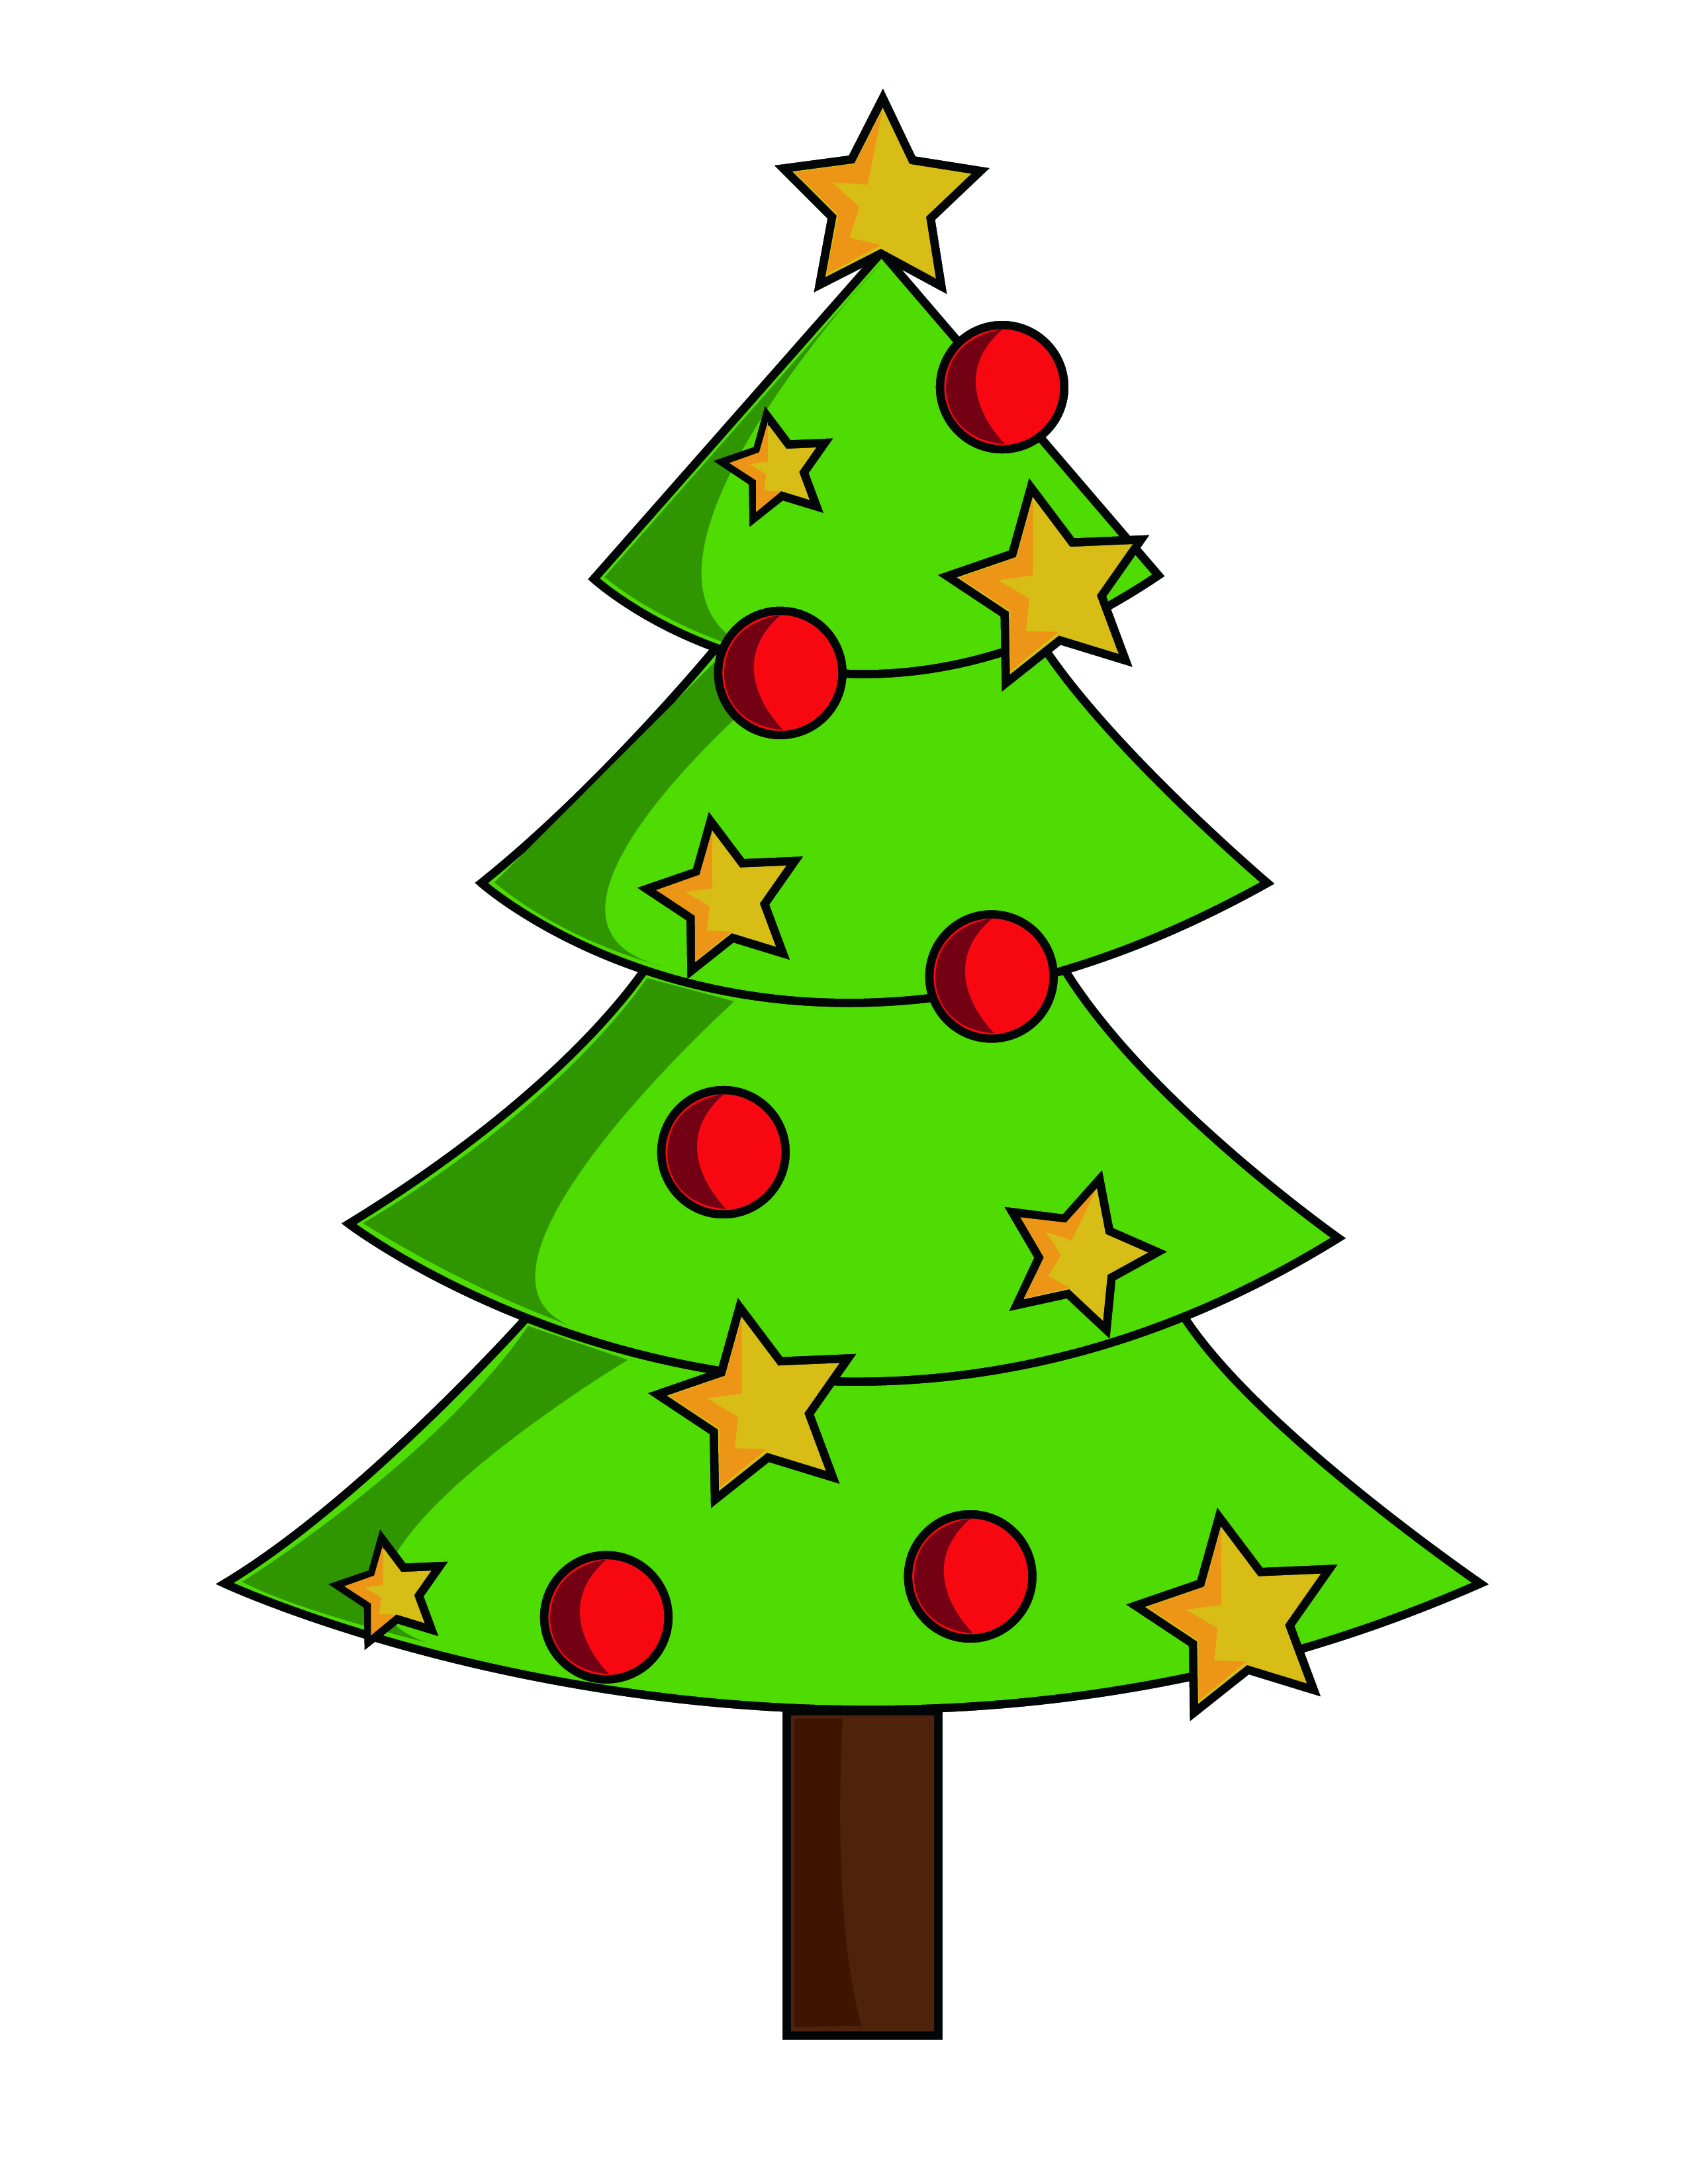 22 Pics Of X Mas Tree Free Cliparts That You Can Download To You